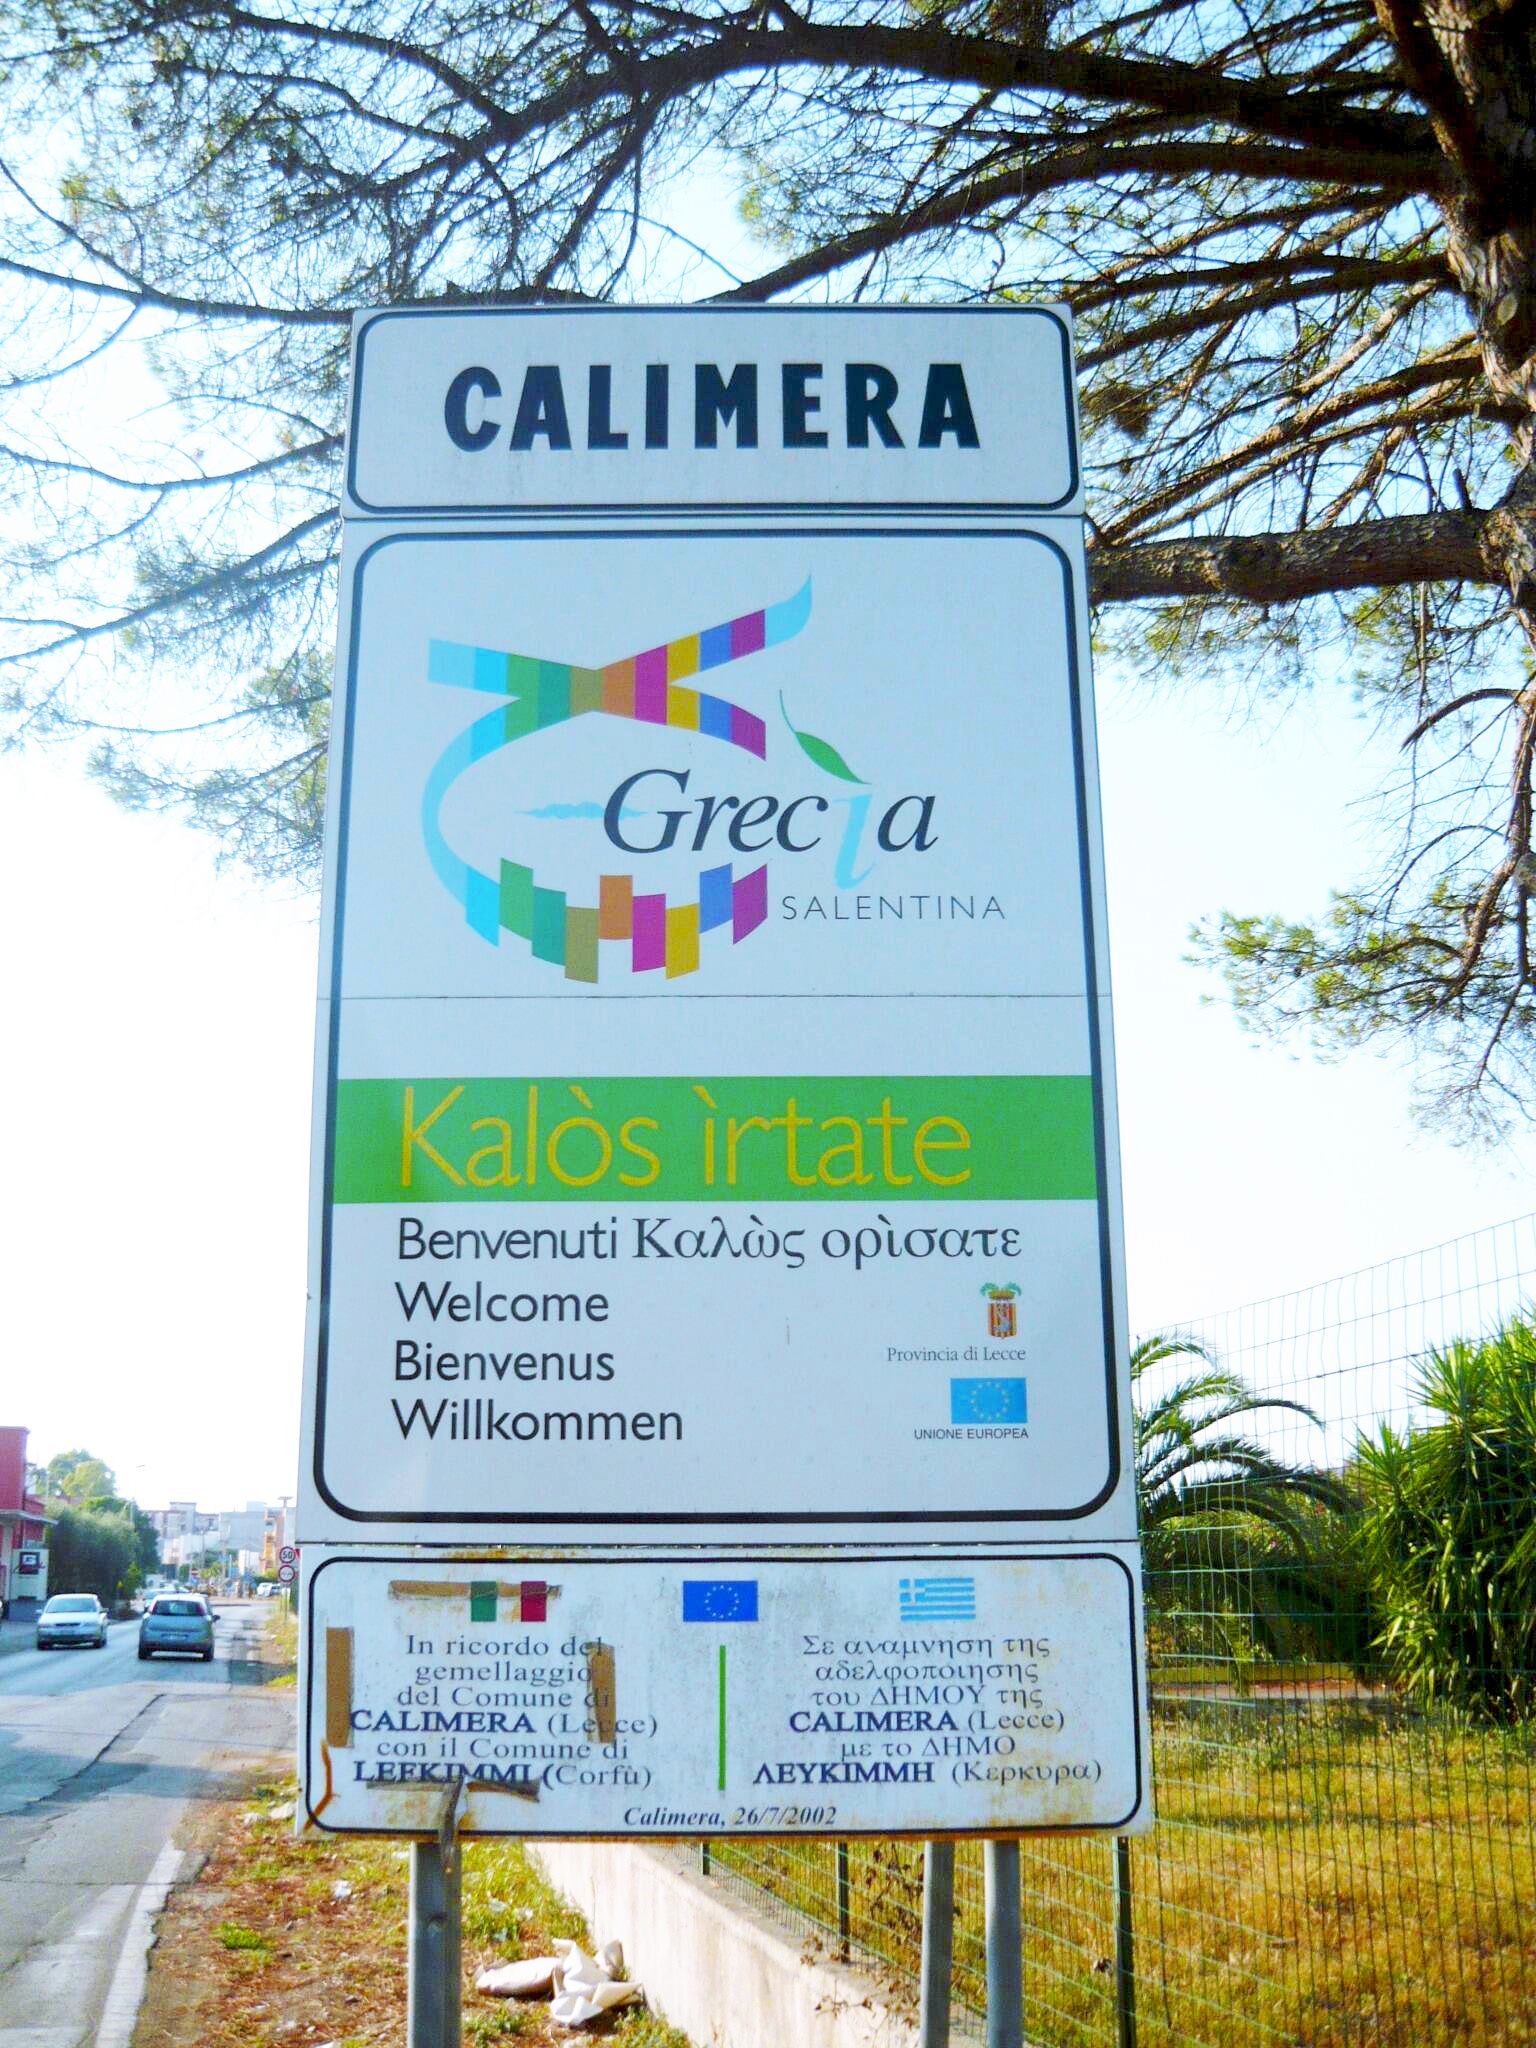 There are 2 Greek languages in Italy’s south: Greko and Griko spoken by the “Calabrian Greeks”.